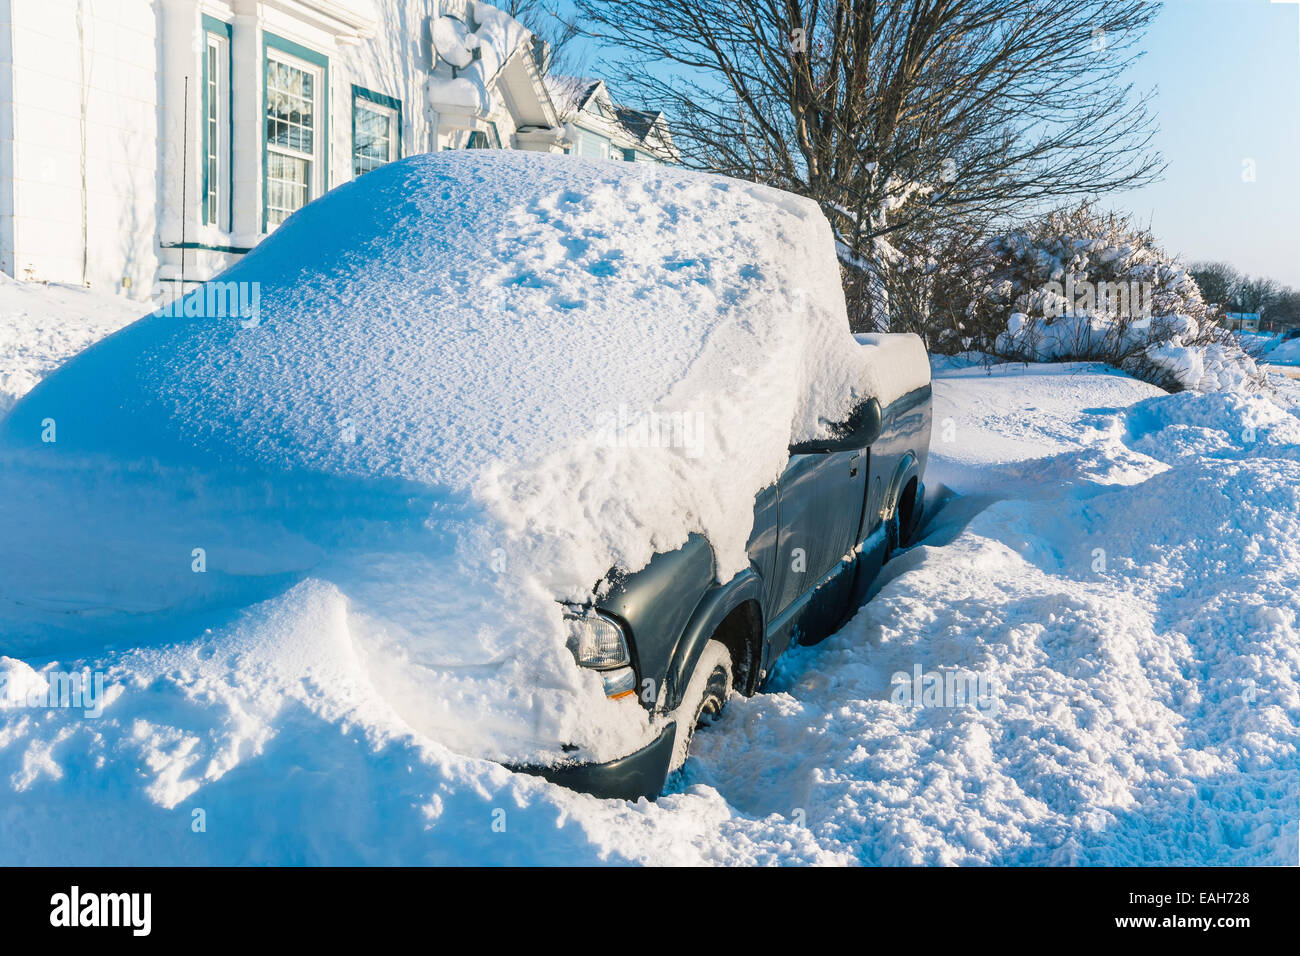 A quart ton truck buried under snow in a suburban driveway. Stock Photo